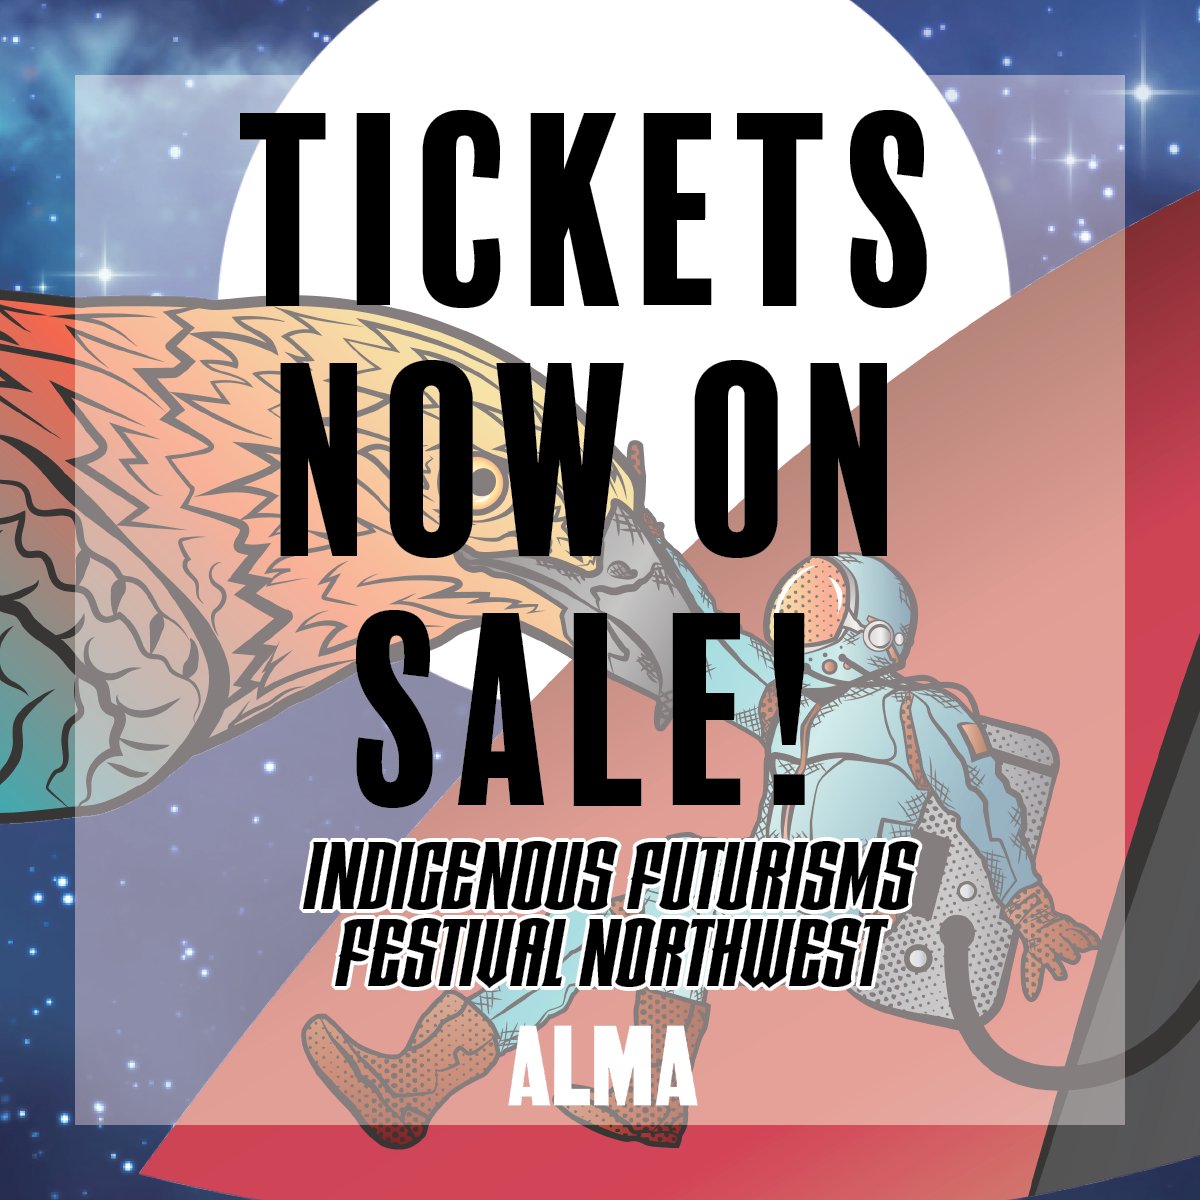 BIG NEWS, #Indiginerds! Tickets are now available for the The Indigenous Futurisms Festival Northwest. Yes, IFFNW is still FREE! Read all about it & the festival! ➡ atribecalledgeek.com/iffnw-tacoma-2…

#IFFNW2023 #IndiginerdsAssemble #IndigenousFuturism #ALMATacoma
#TheFutureIsIndigenous